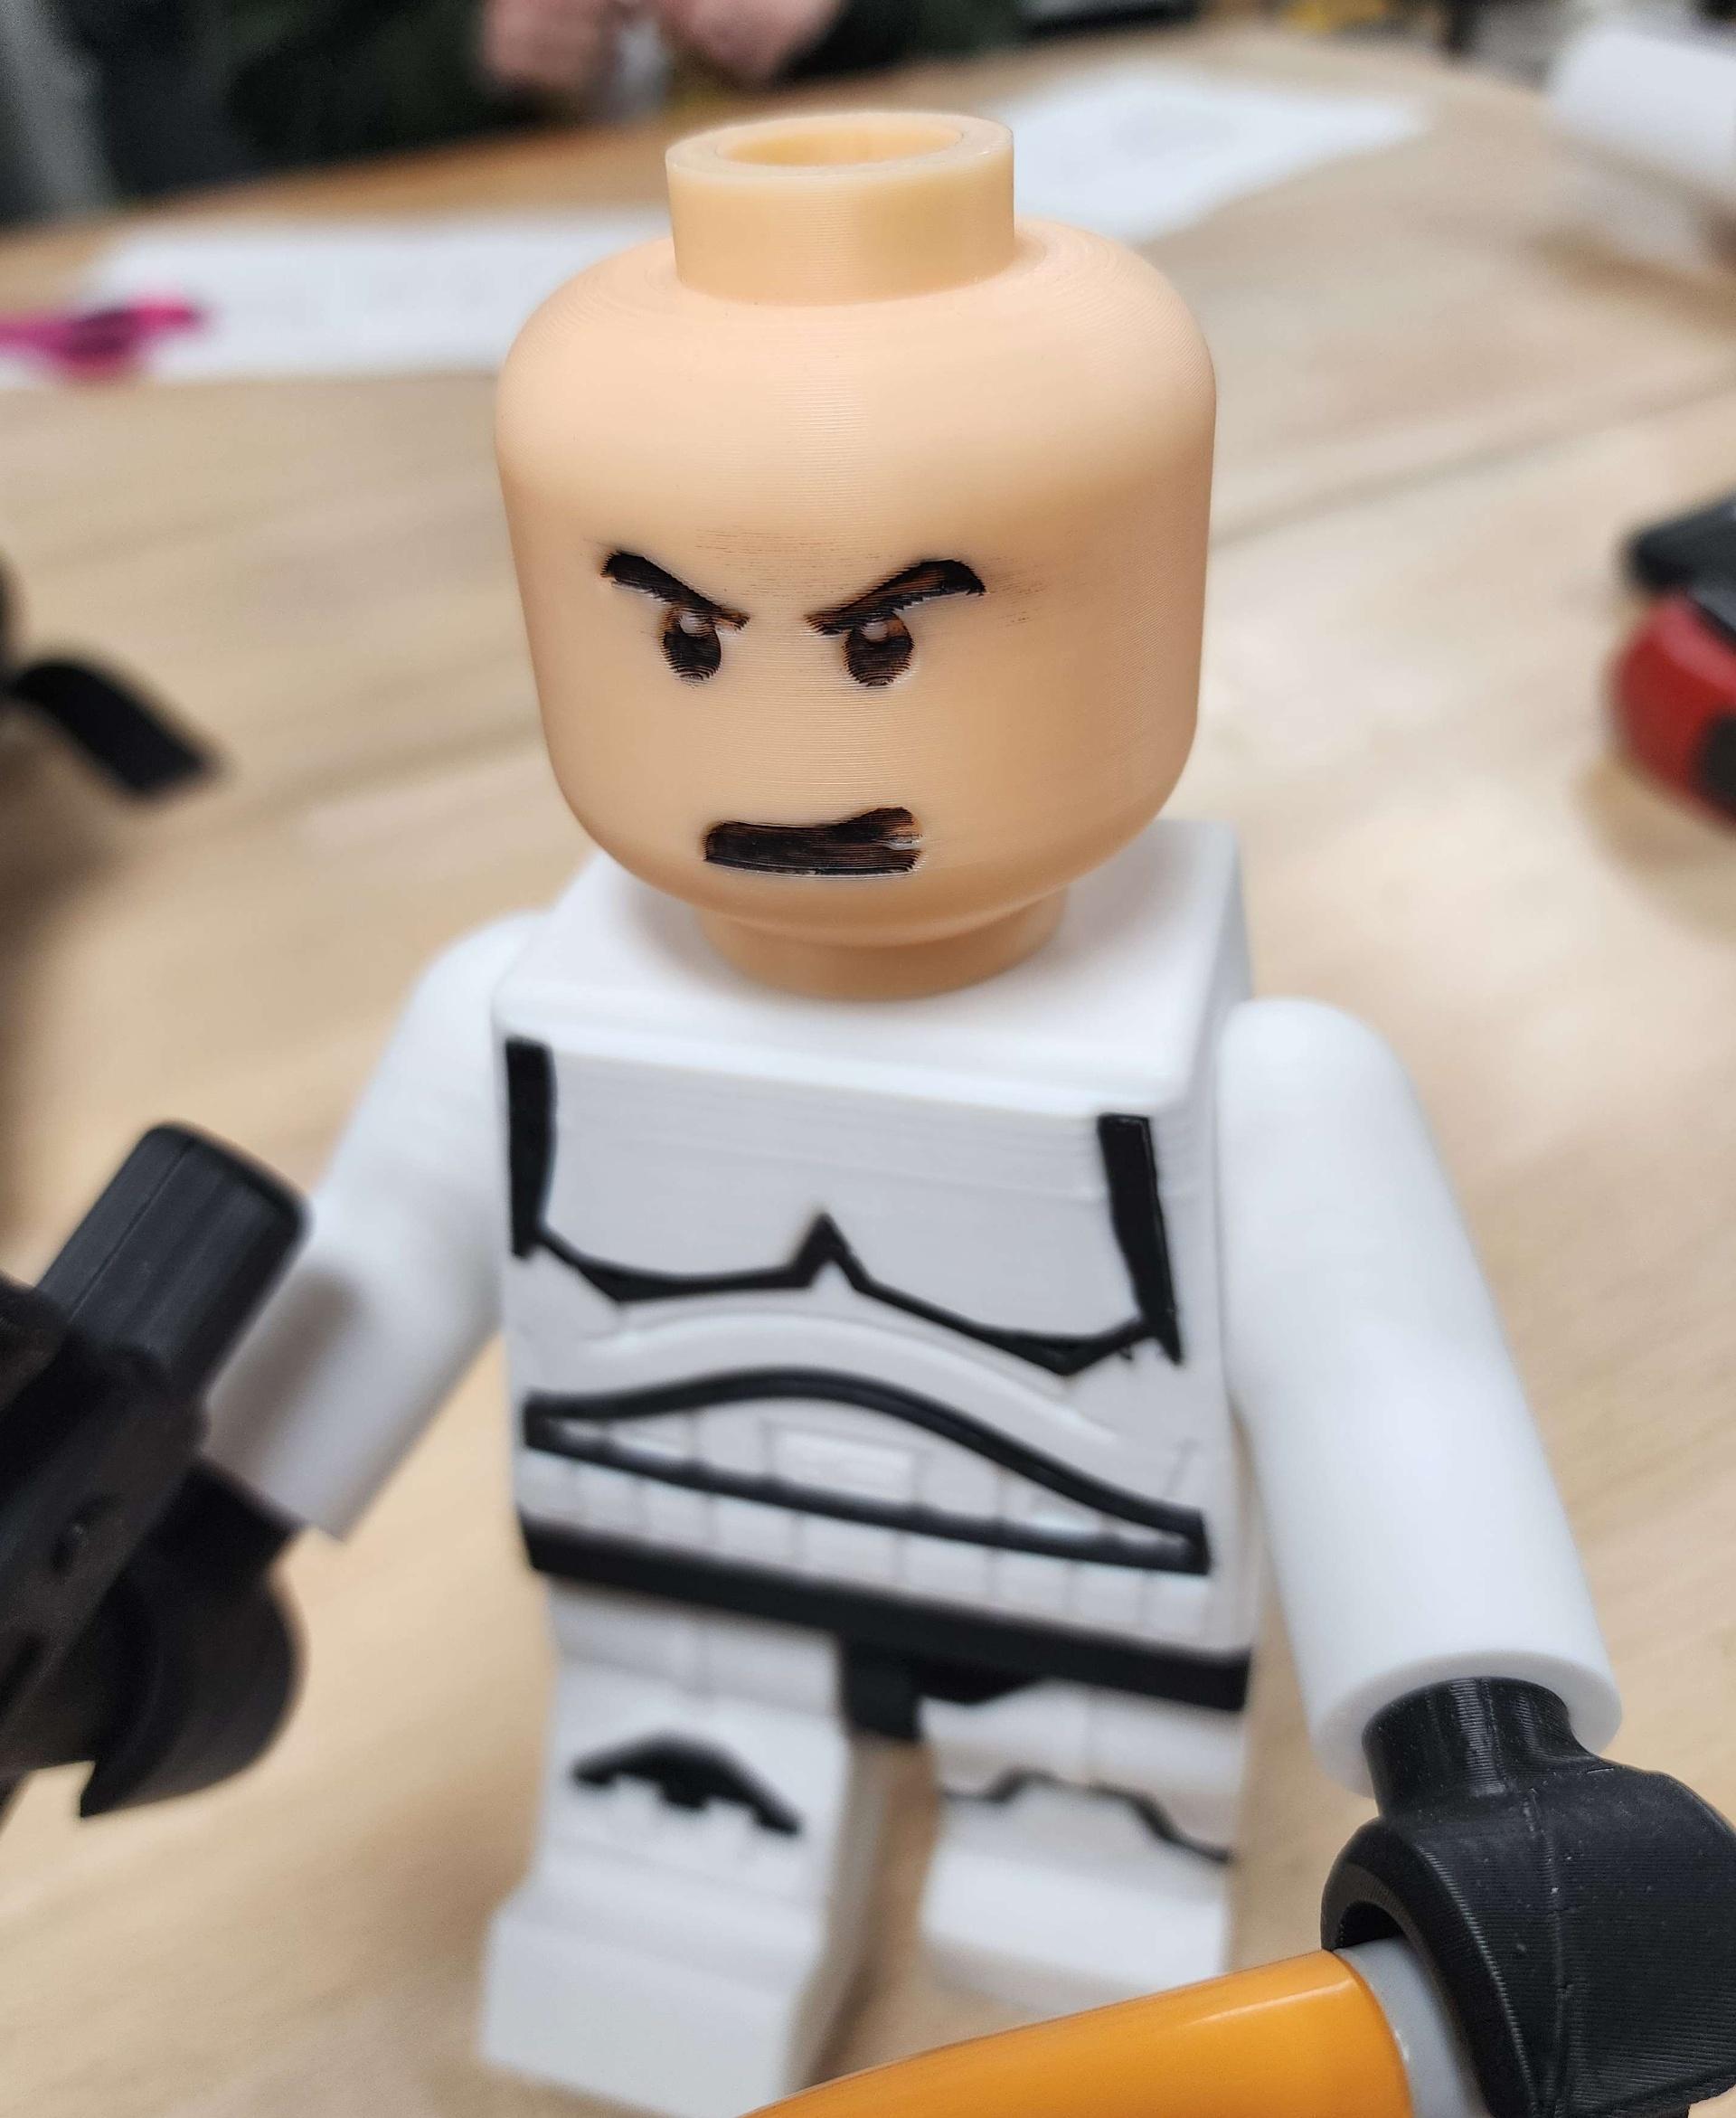 Stormtrooper (6:1 LEGO-inspired brick figure, NO MMU/AMS, NO supports, NO glue) - Ready for action! - 3d model